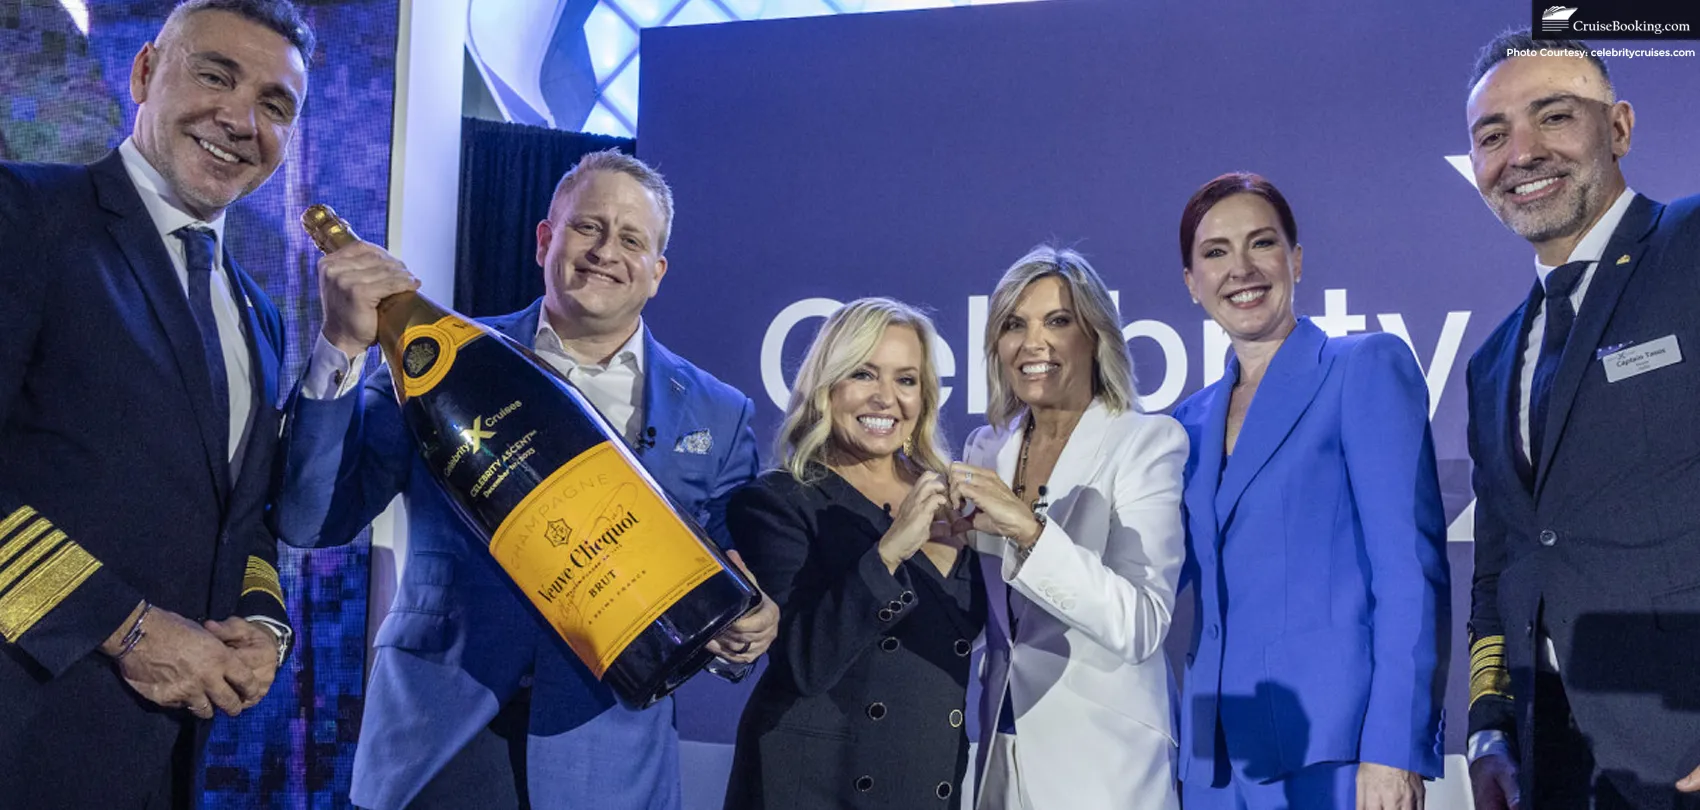 Celebrity Cruises’ Ascent Officially Named in a Ceremony